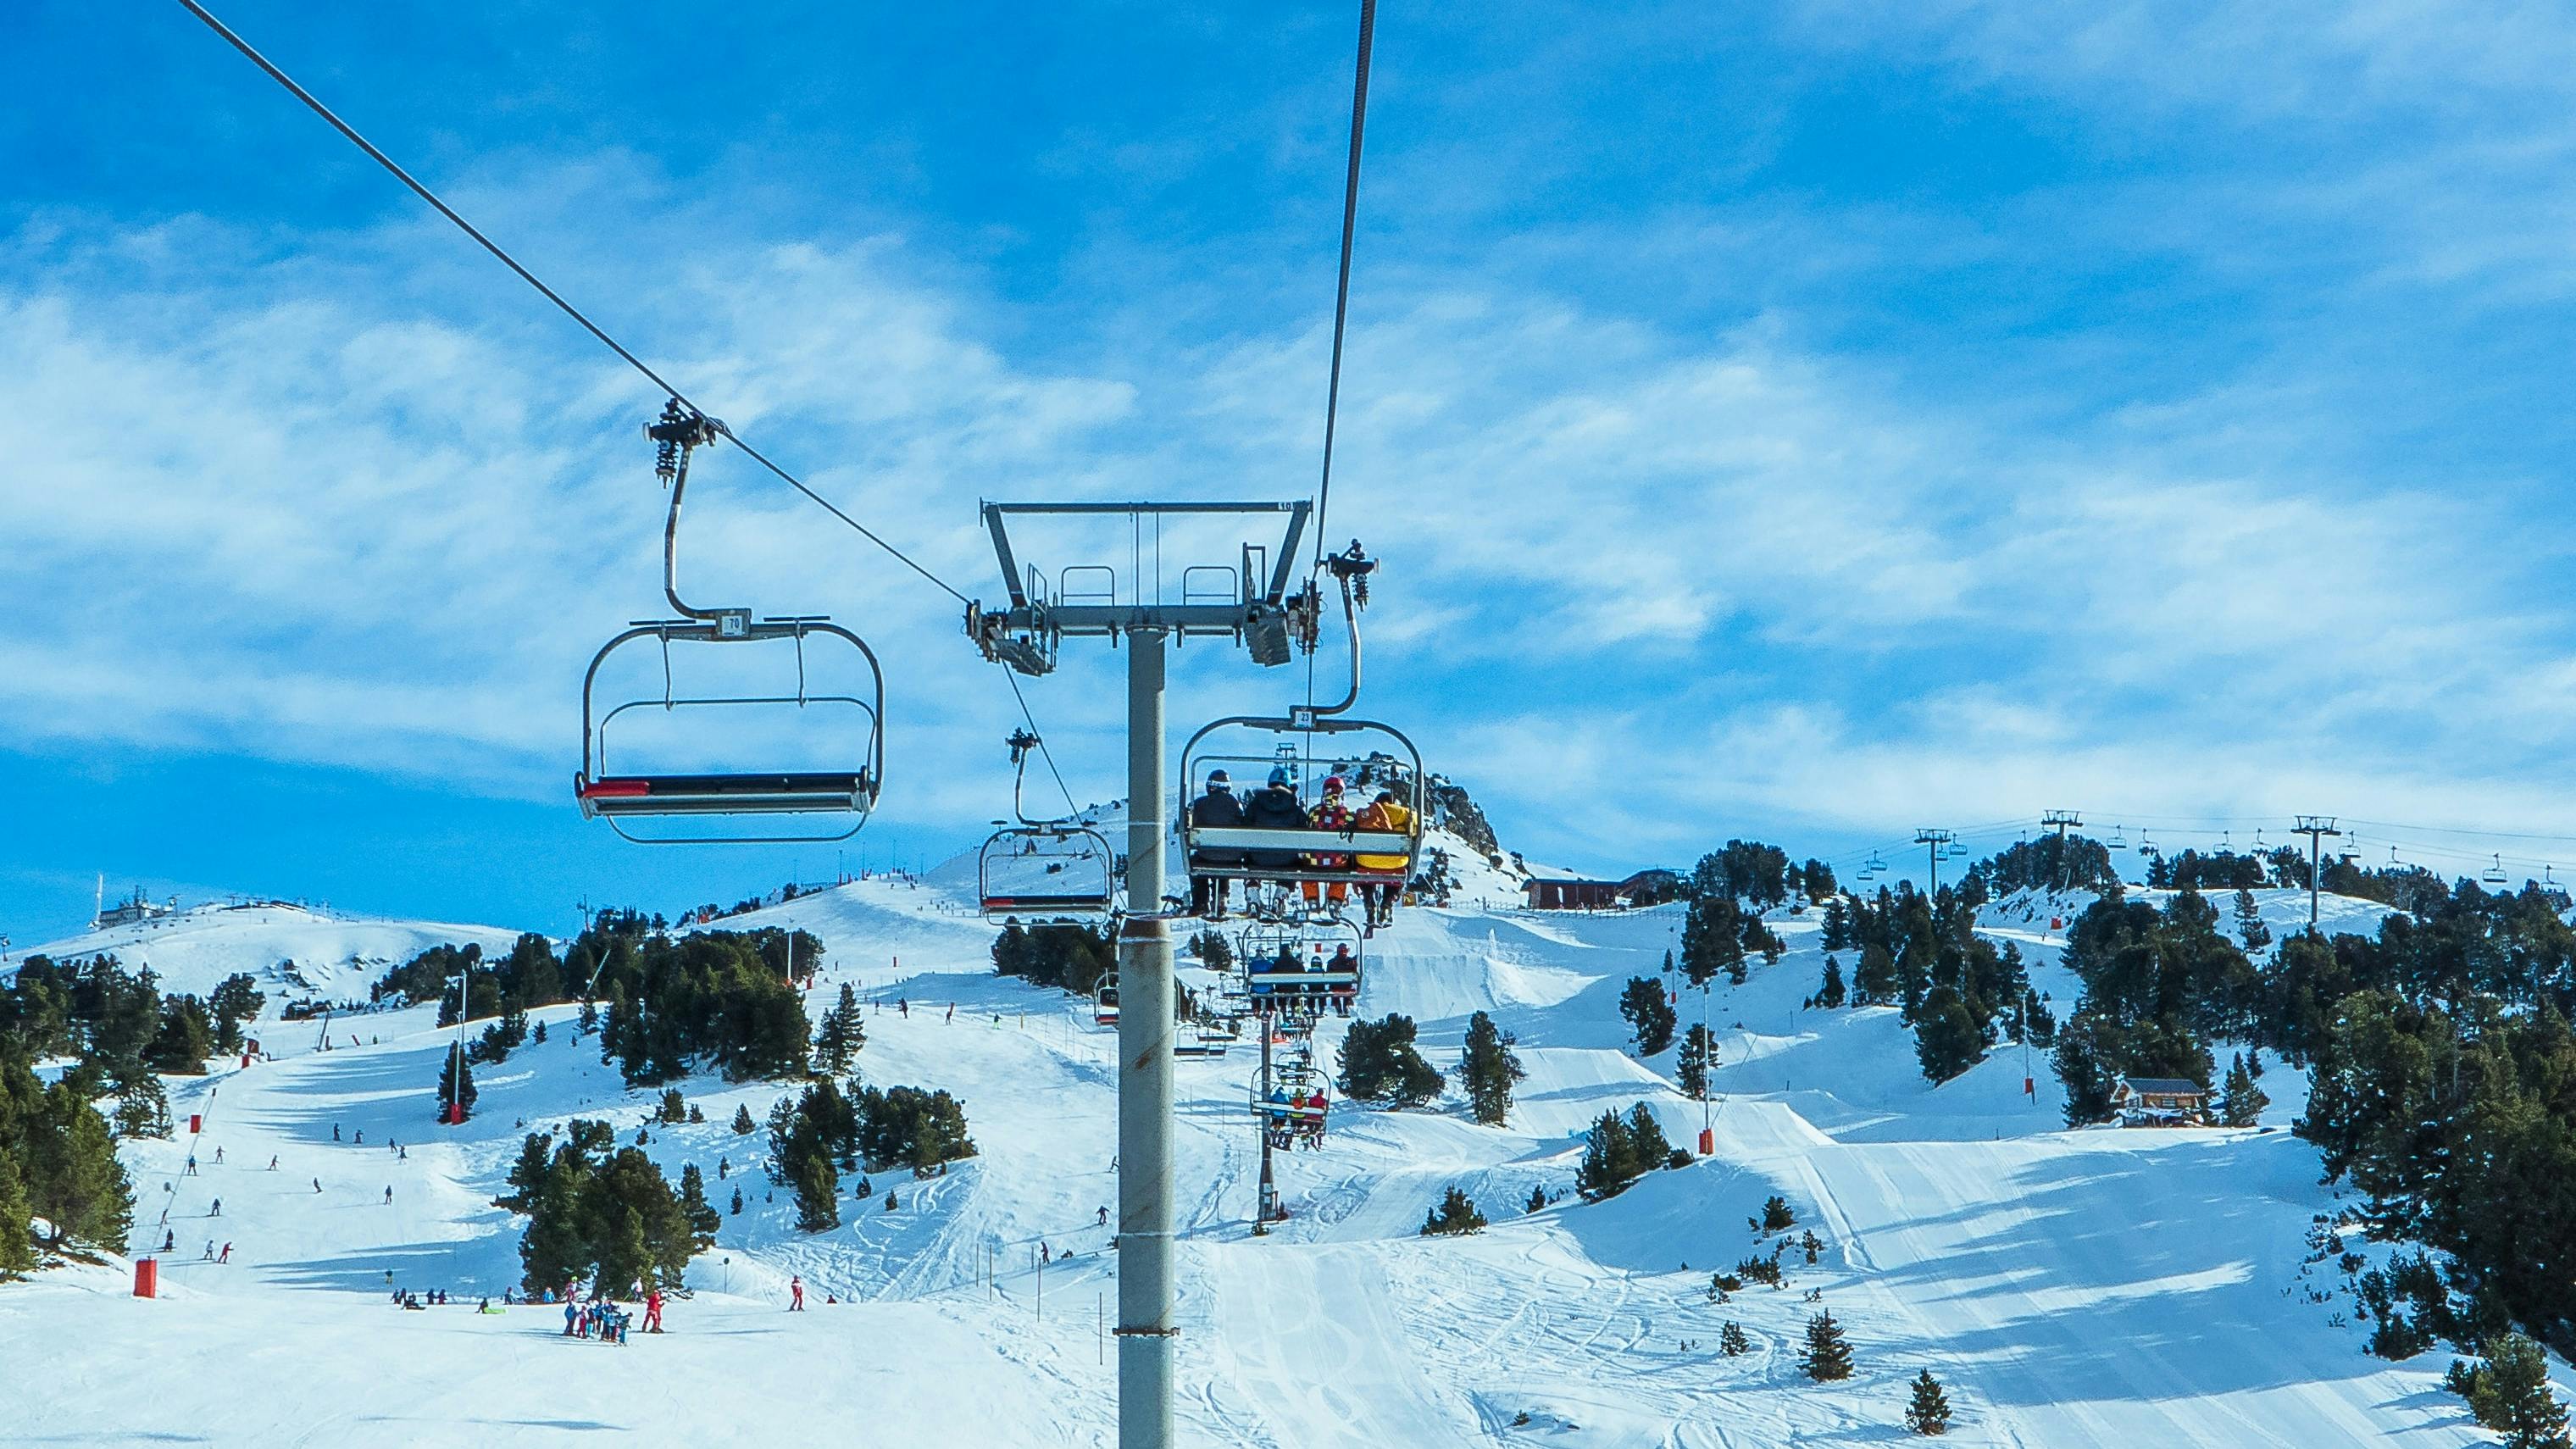 A chair lift against a blue sky and a snowy mountain